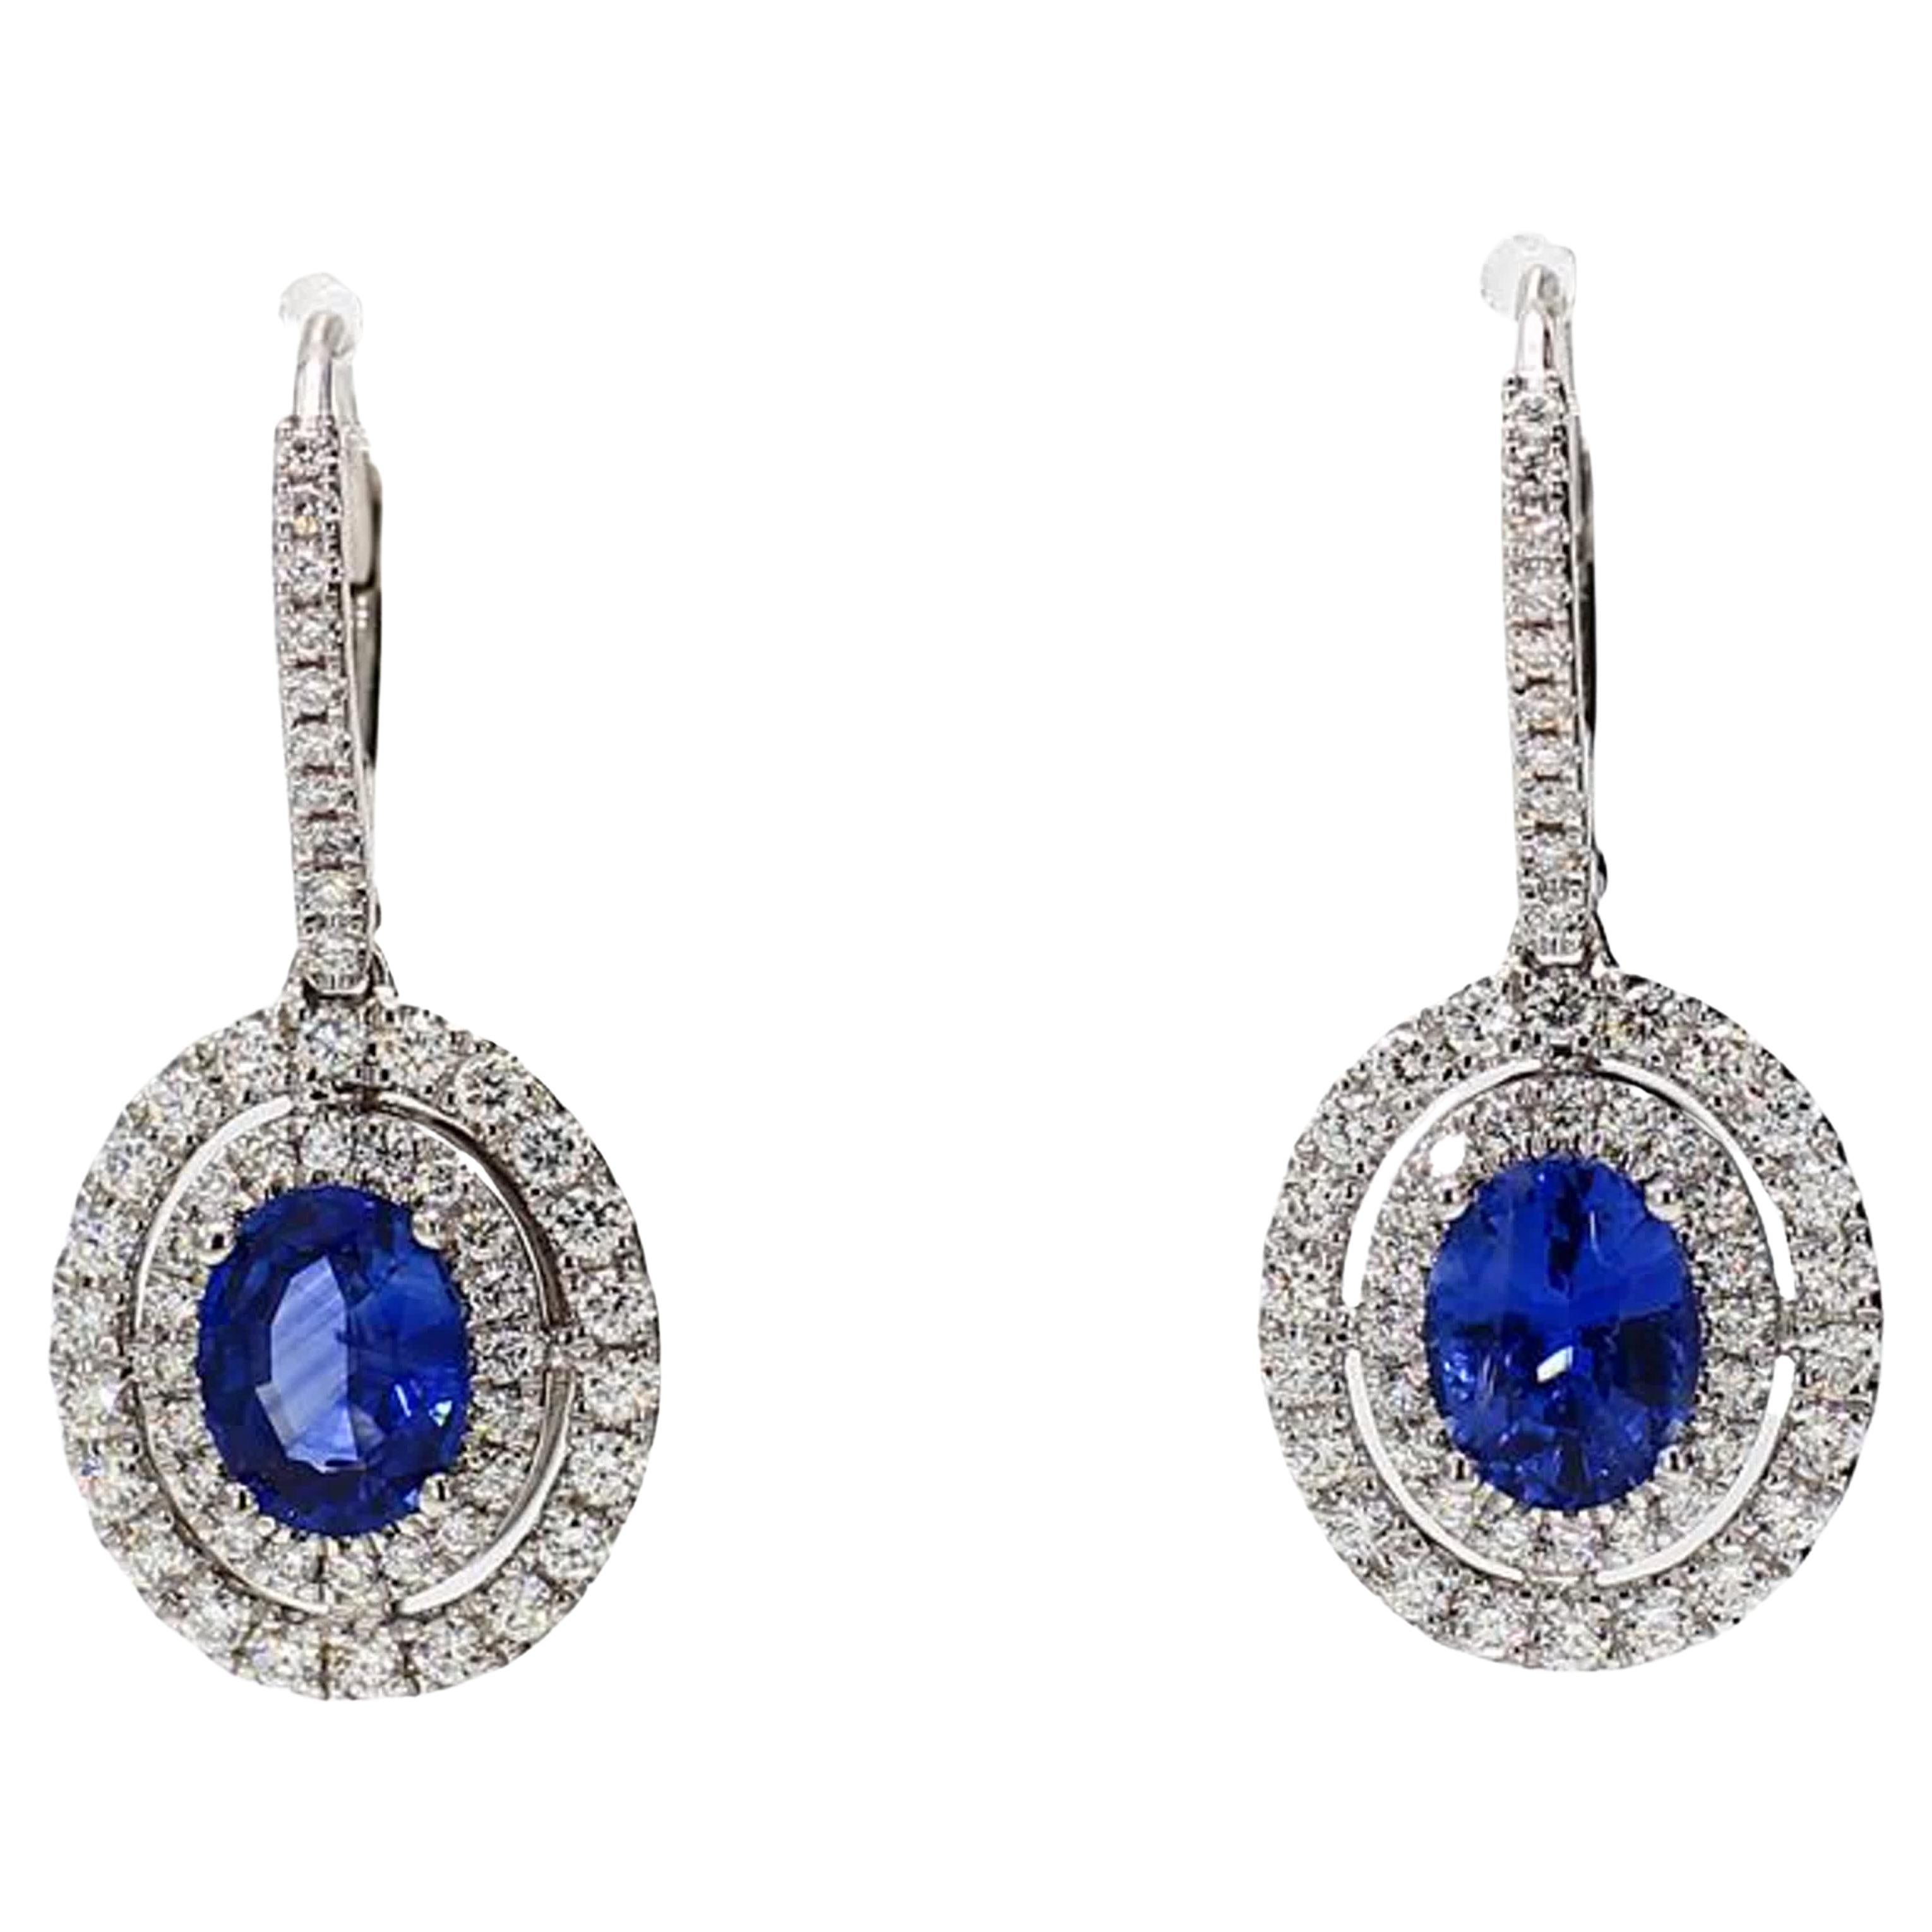 26 Carat Royal Blue Sapphire and Diamond White Gold Earrings For Sale ...